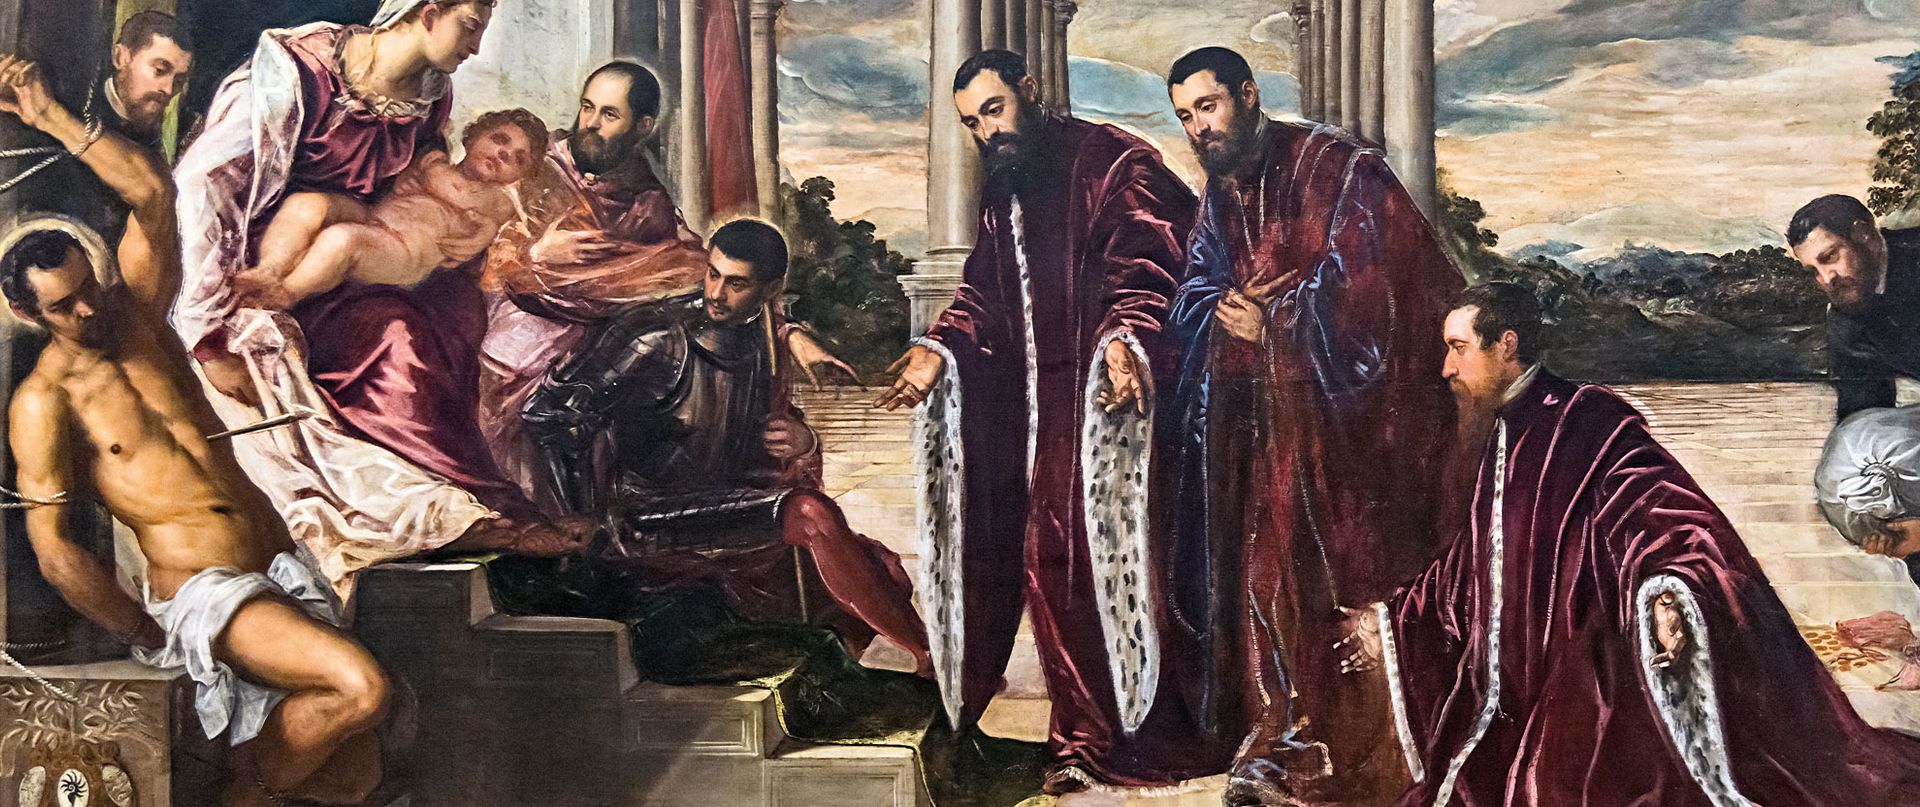 Tintoretto: Madonna of the Treasurers (around 1567), which is more than 5m long, was measured to make sure it could travel to the NGA. Right: Self-portrait (around 1588) Didier Descouens